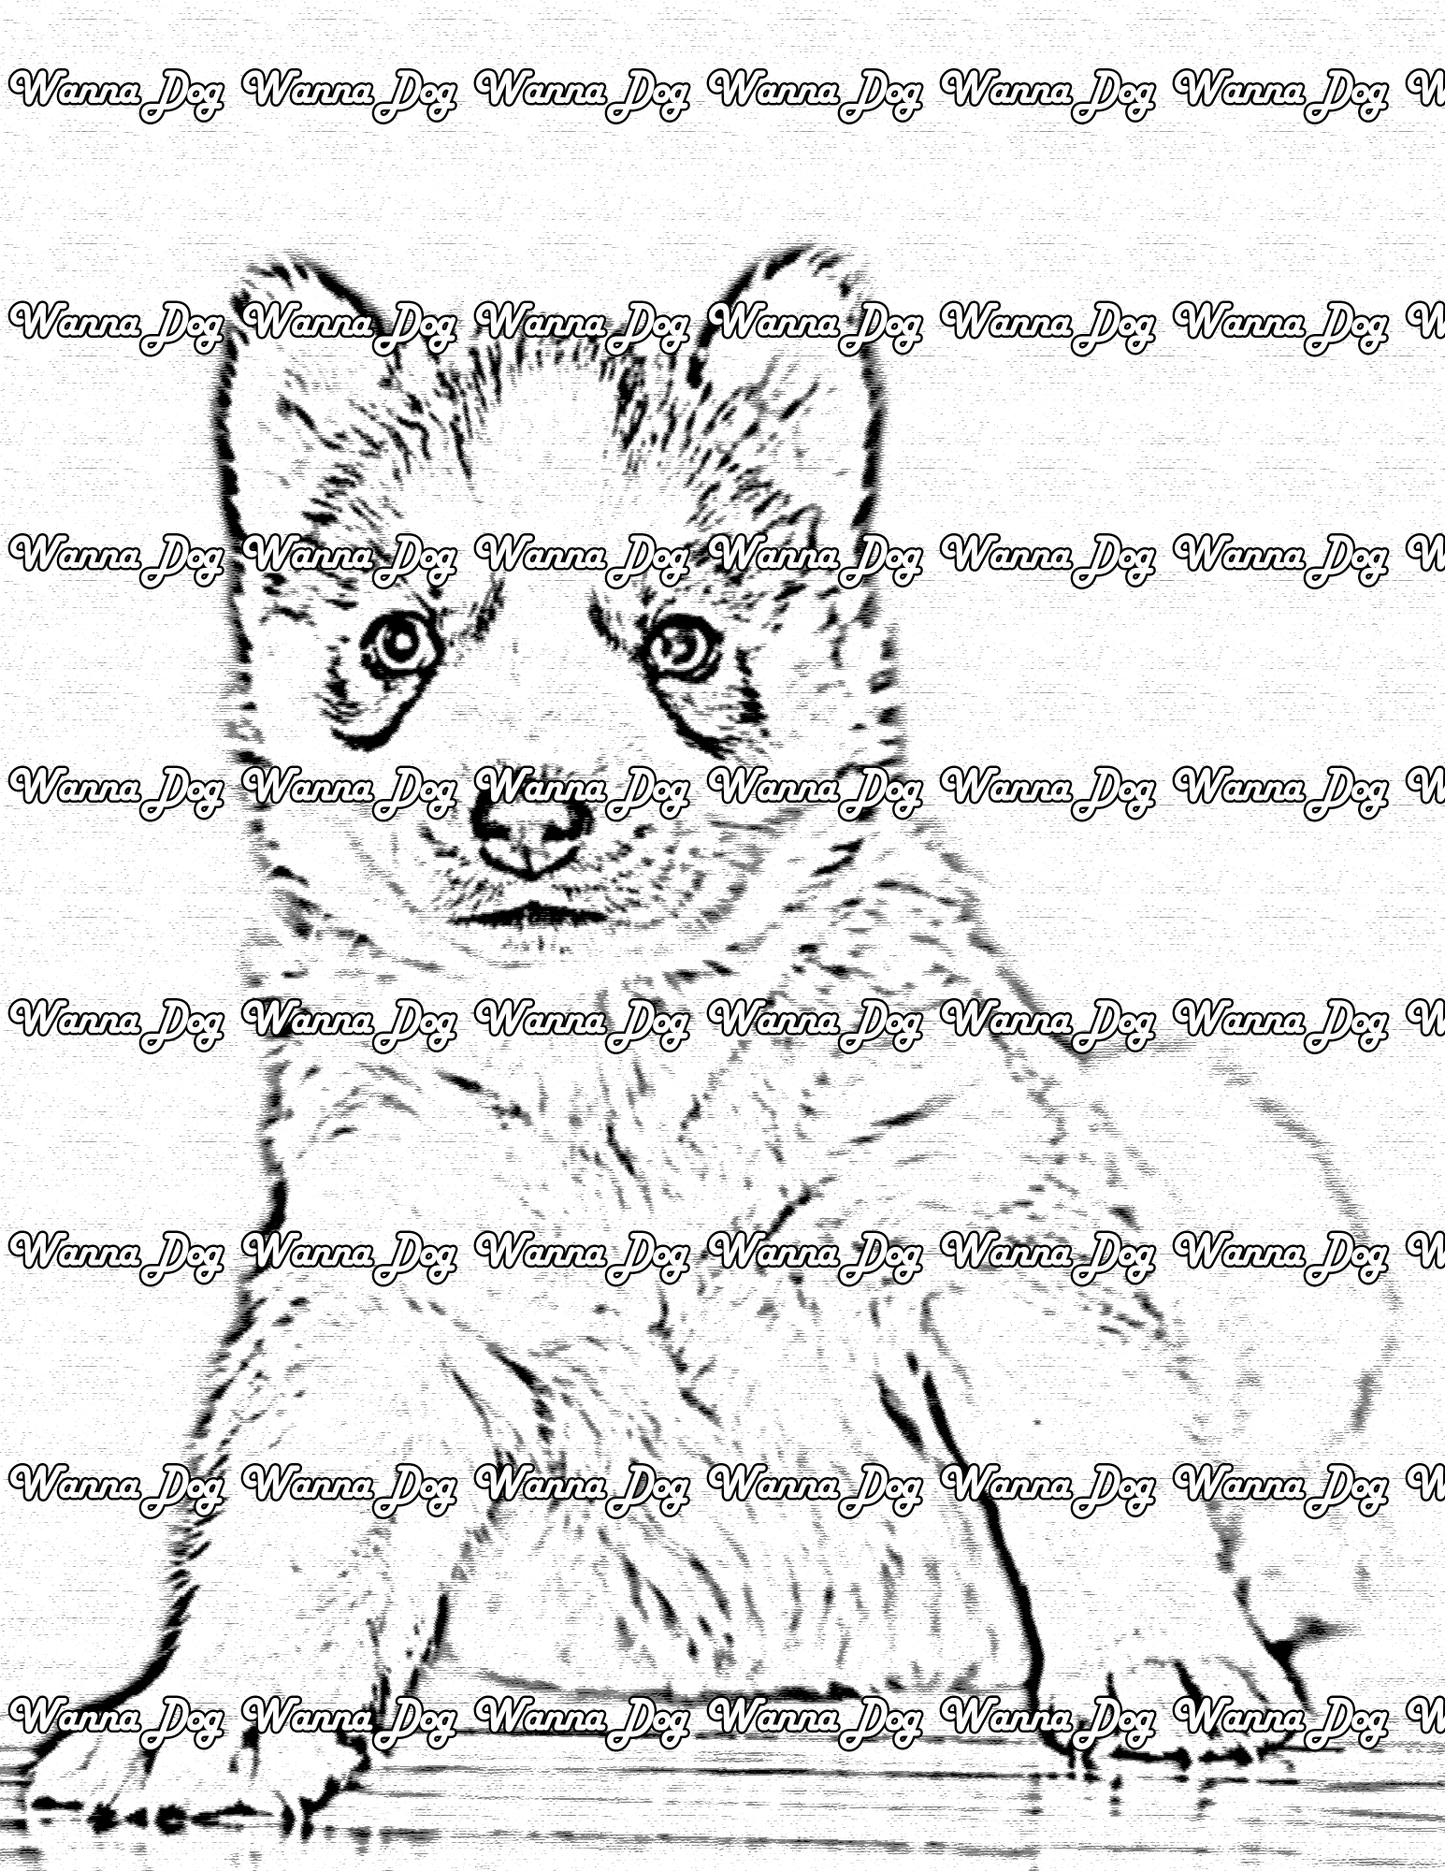 Husky Puppy Coloring Page of a Husky Puppy sitting and spreading out